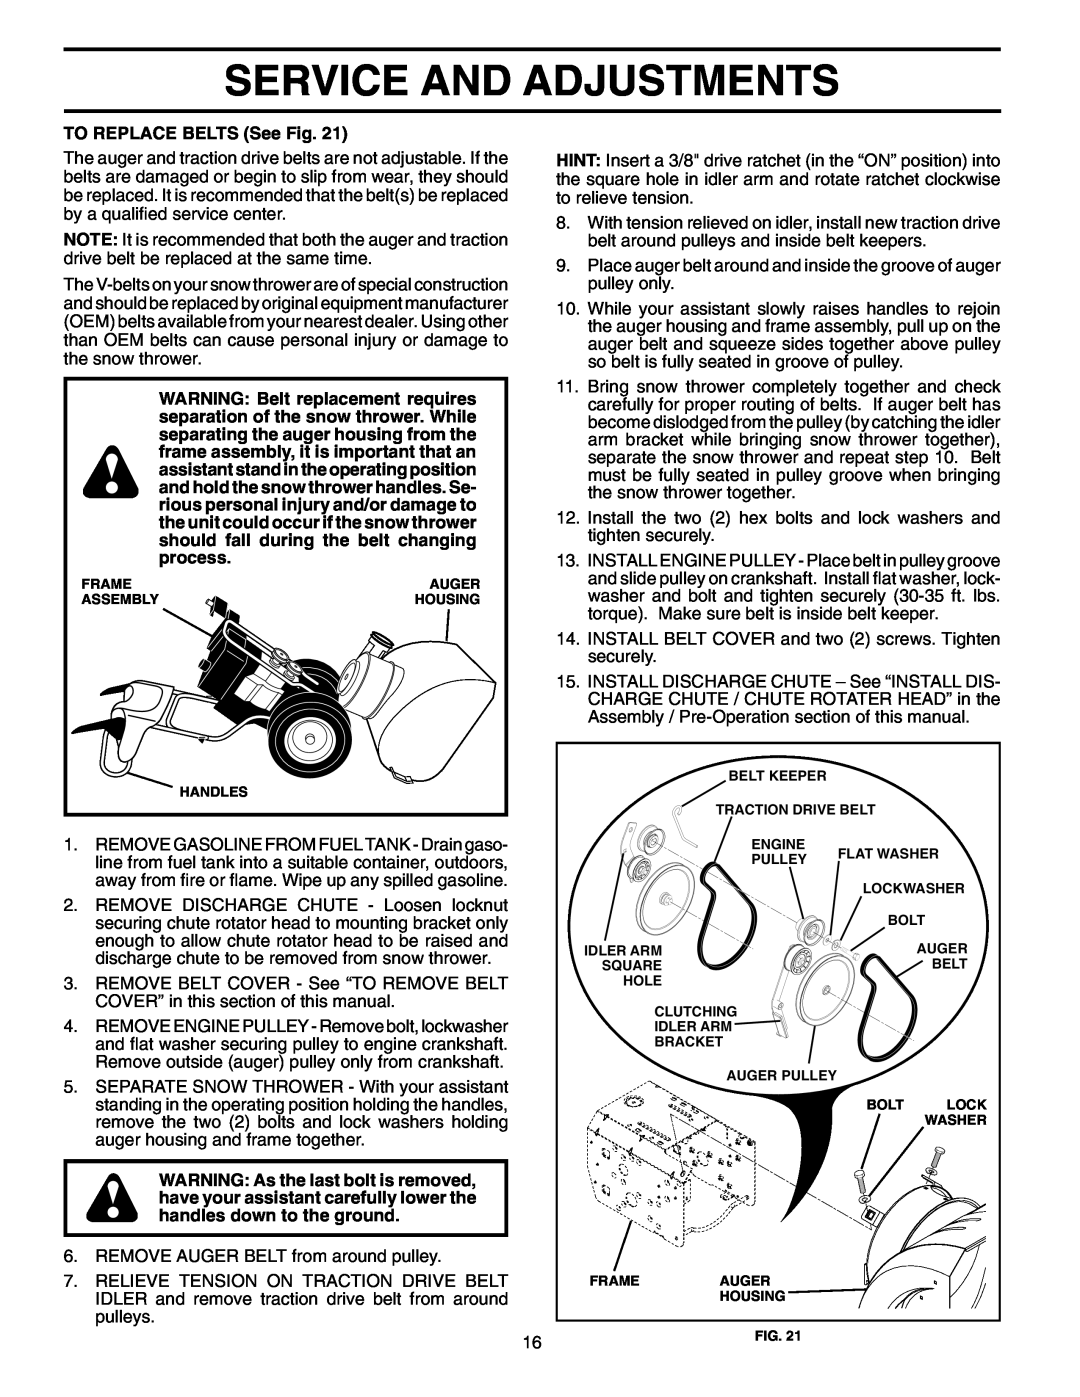 Husqvarna 5524SEB owner manual Service And Adjustments, TO REPLACE BELTS See Fig 